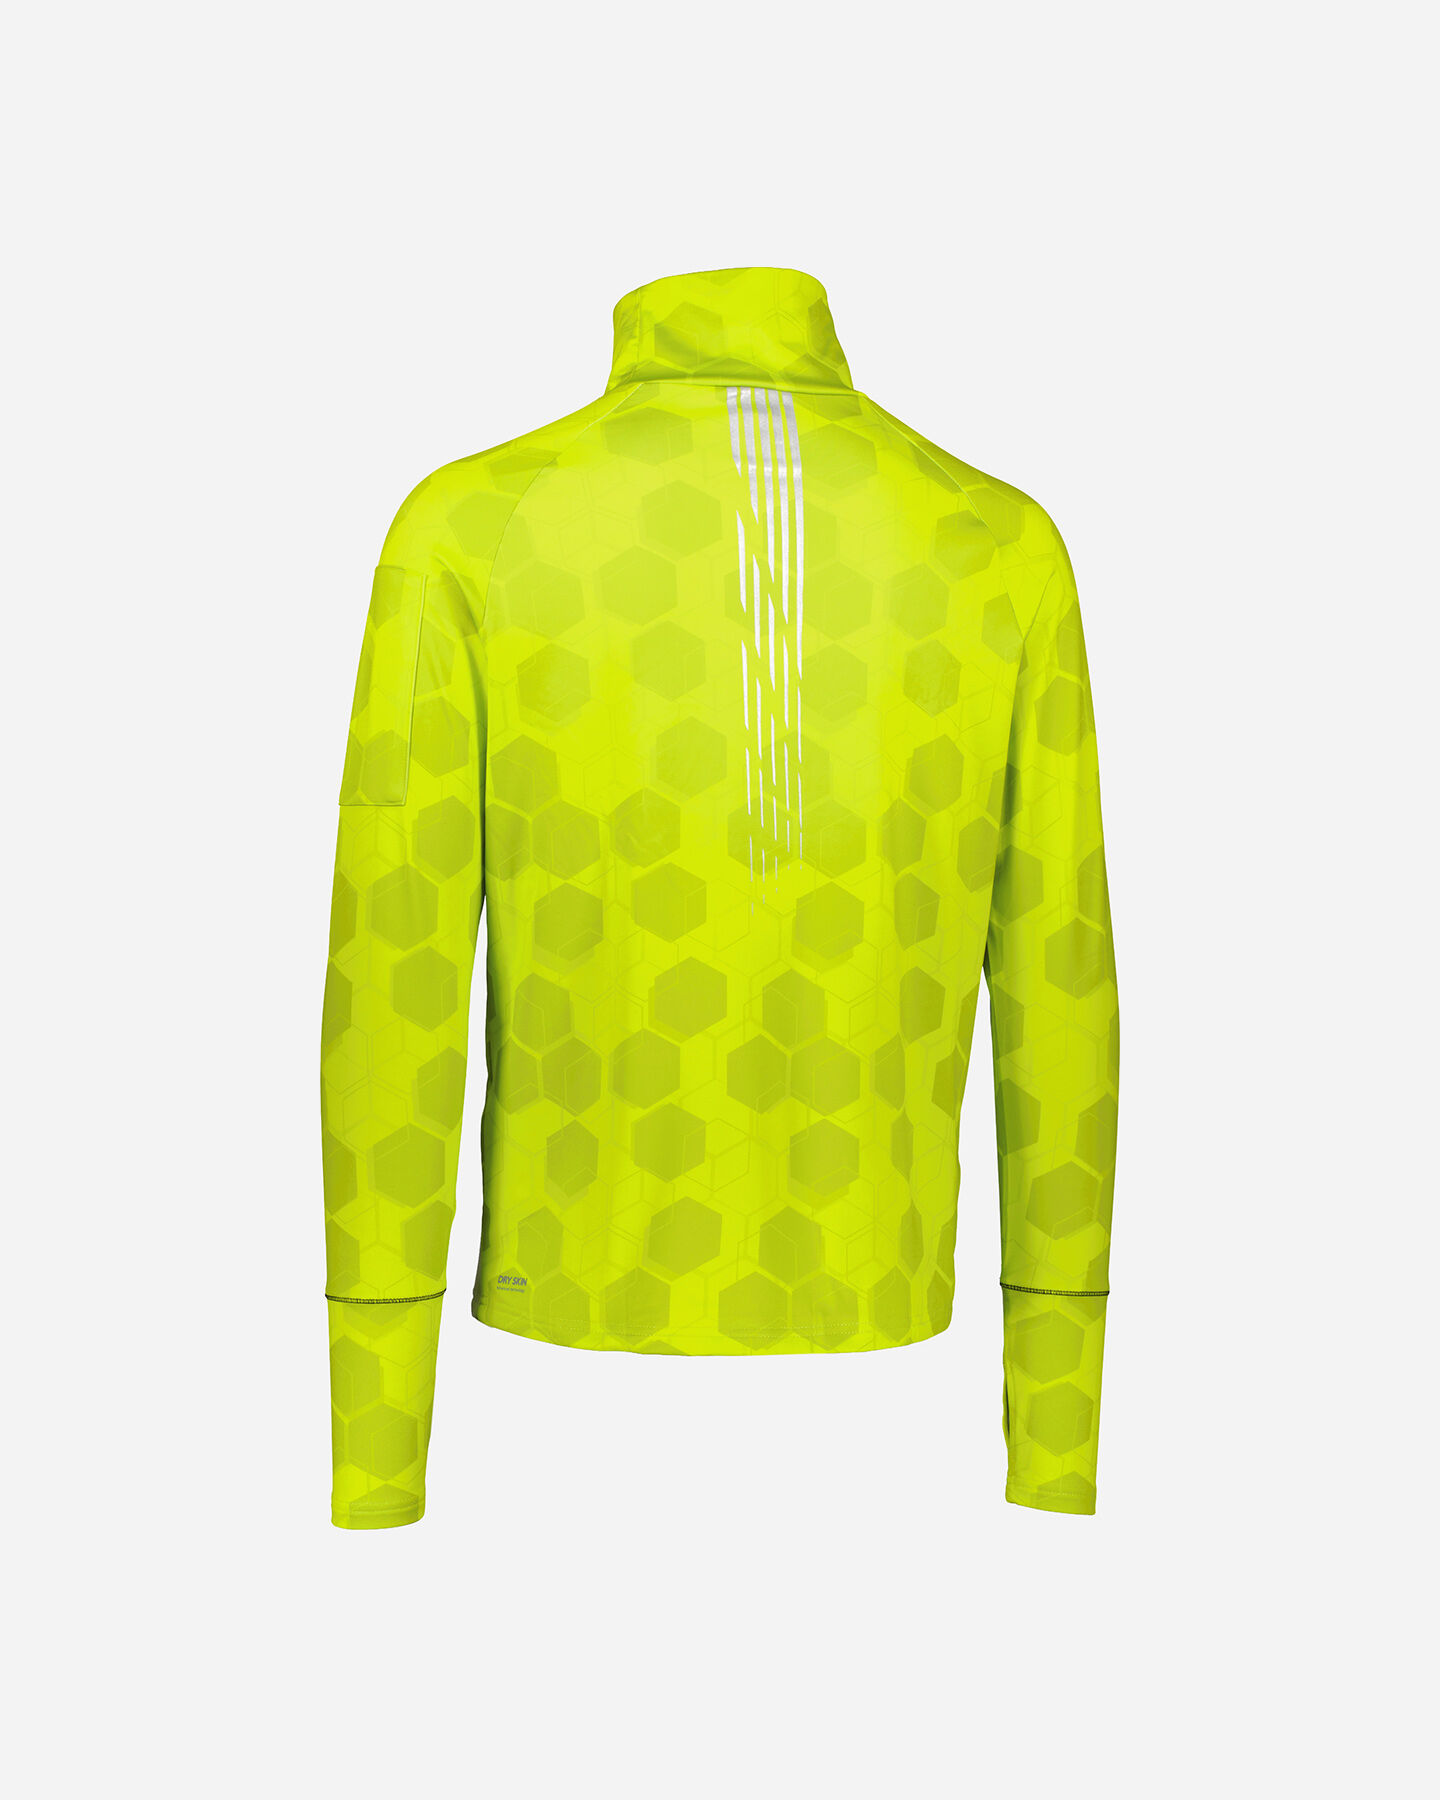  Maglia running ARENA BASIC M/L LIME M S4093398|1094|S scatto 1